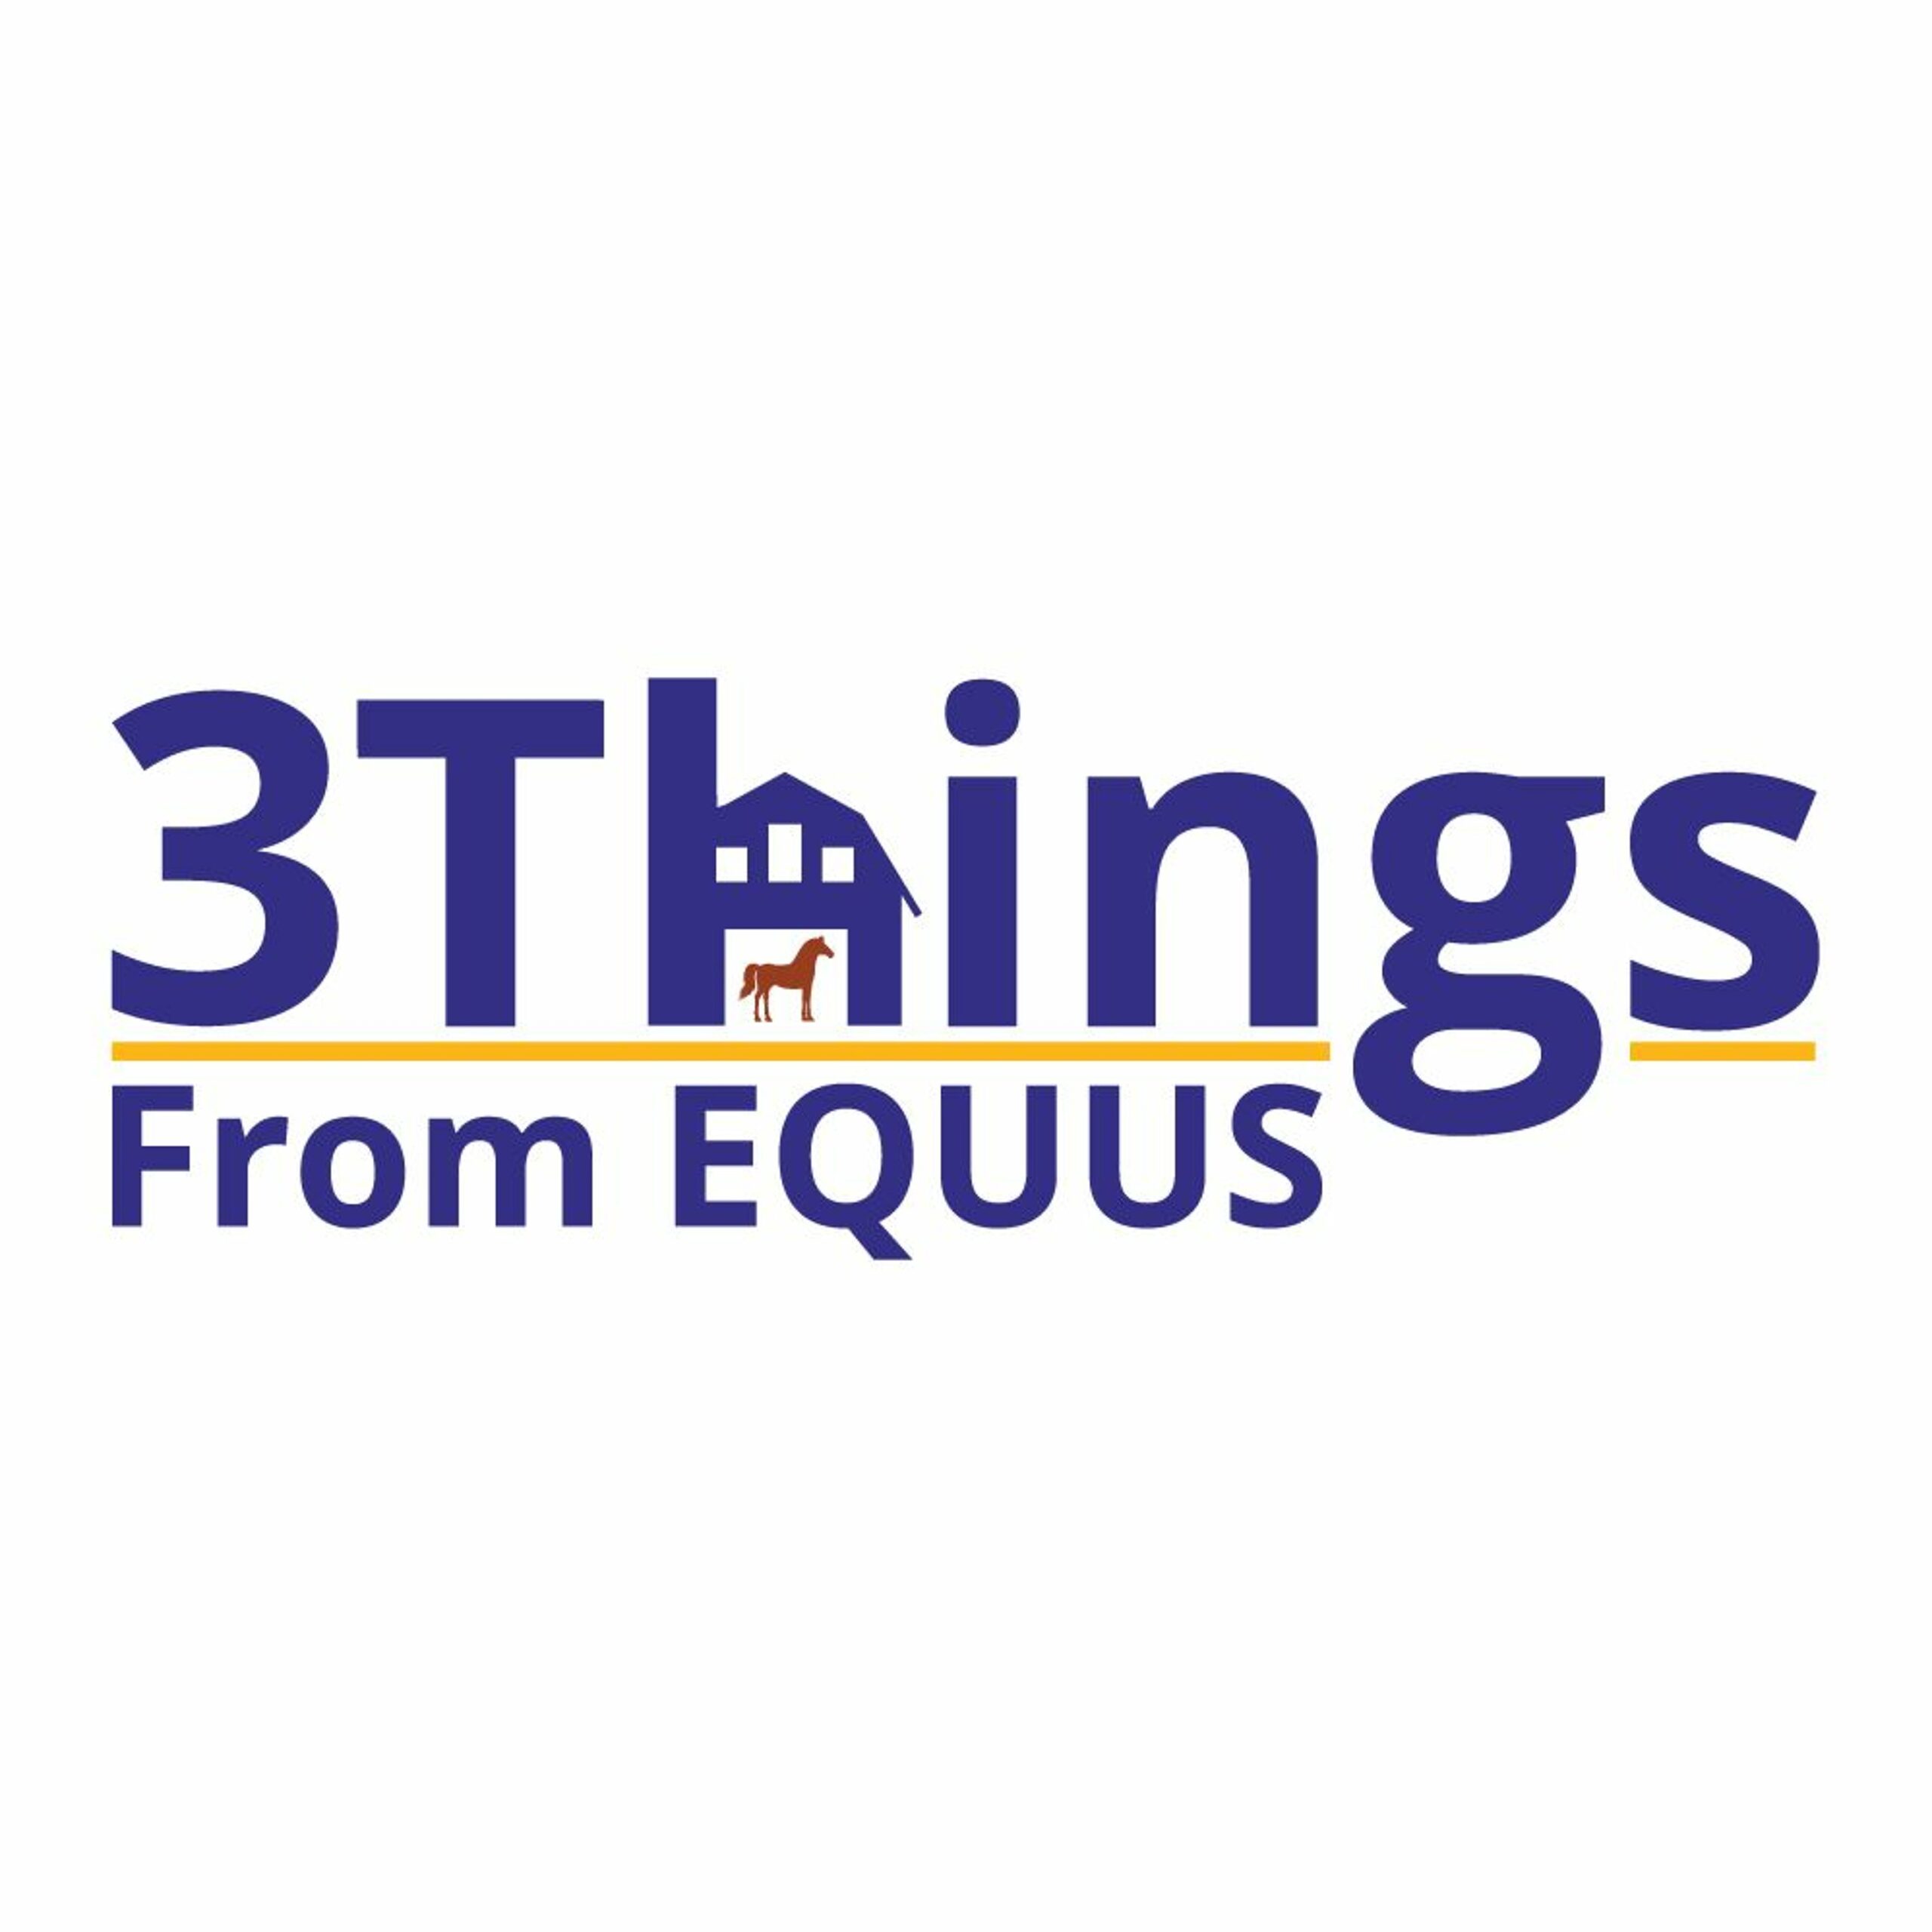 3 Things from Equus